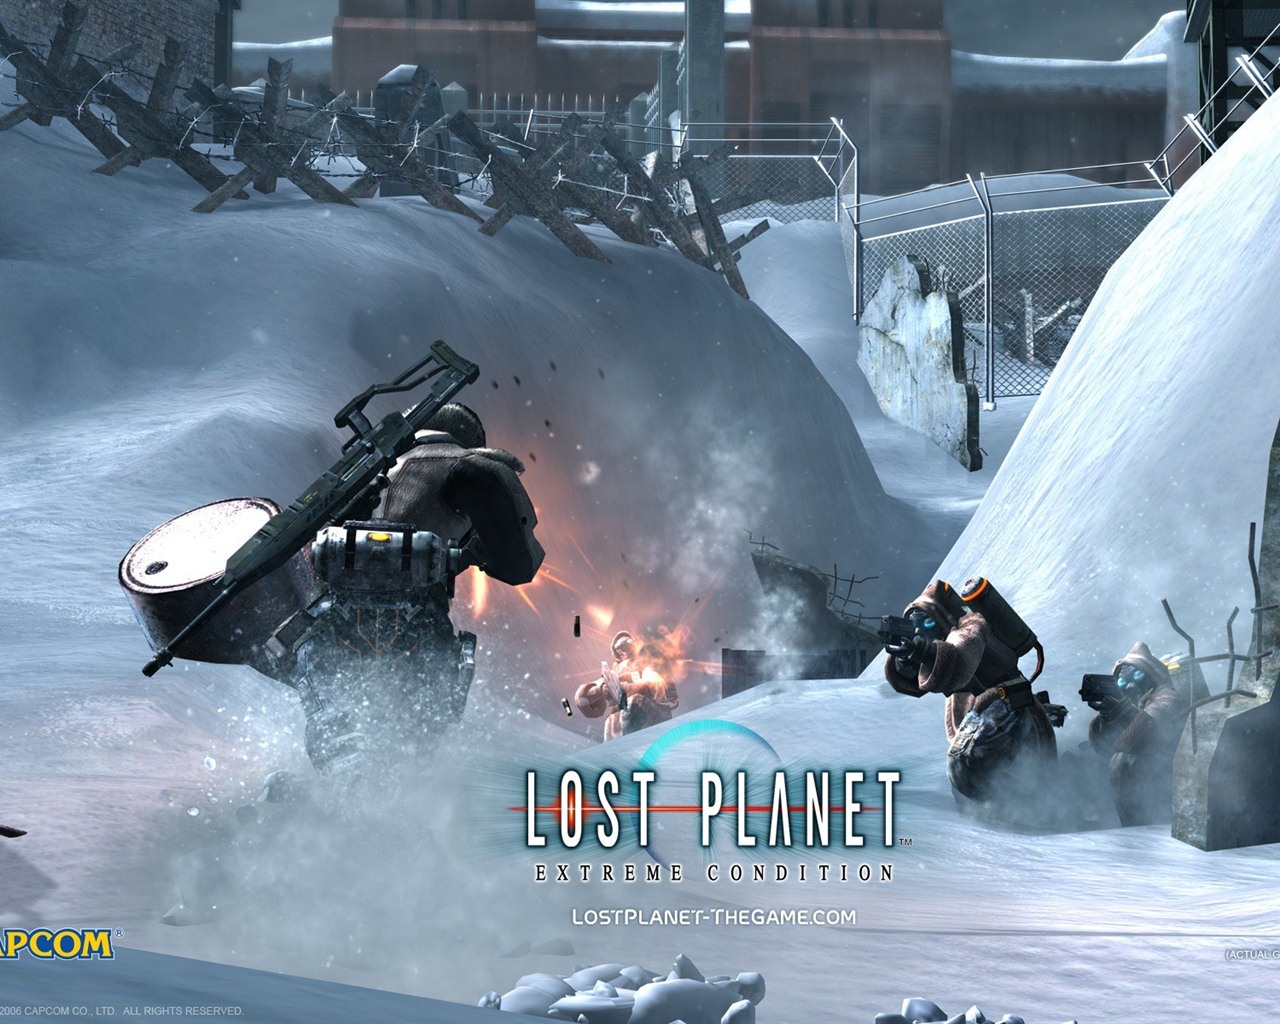 Lost Planet: Extreme Condition HD tapety na plochu #20 - 1280x1024